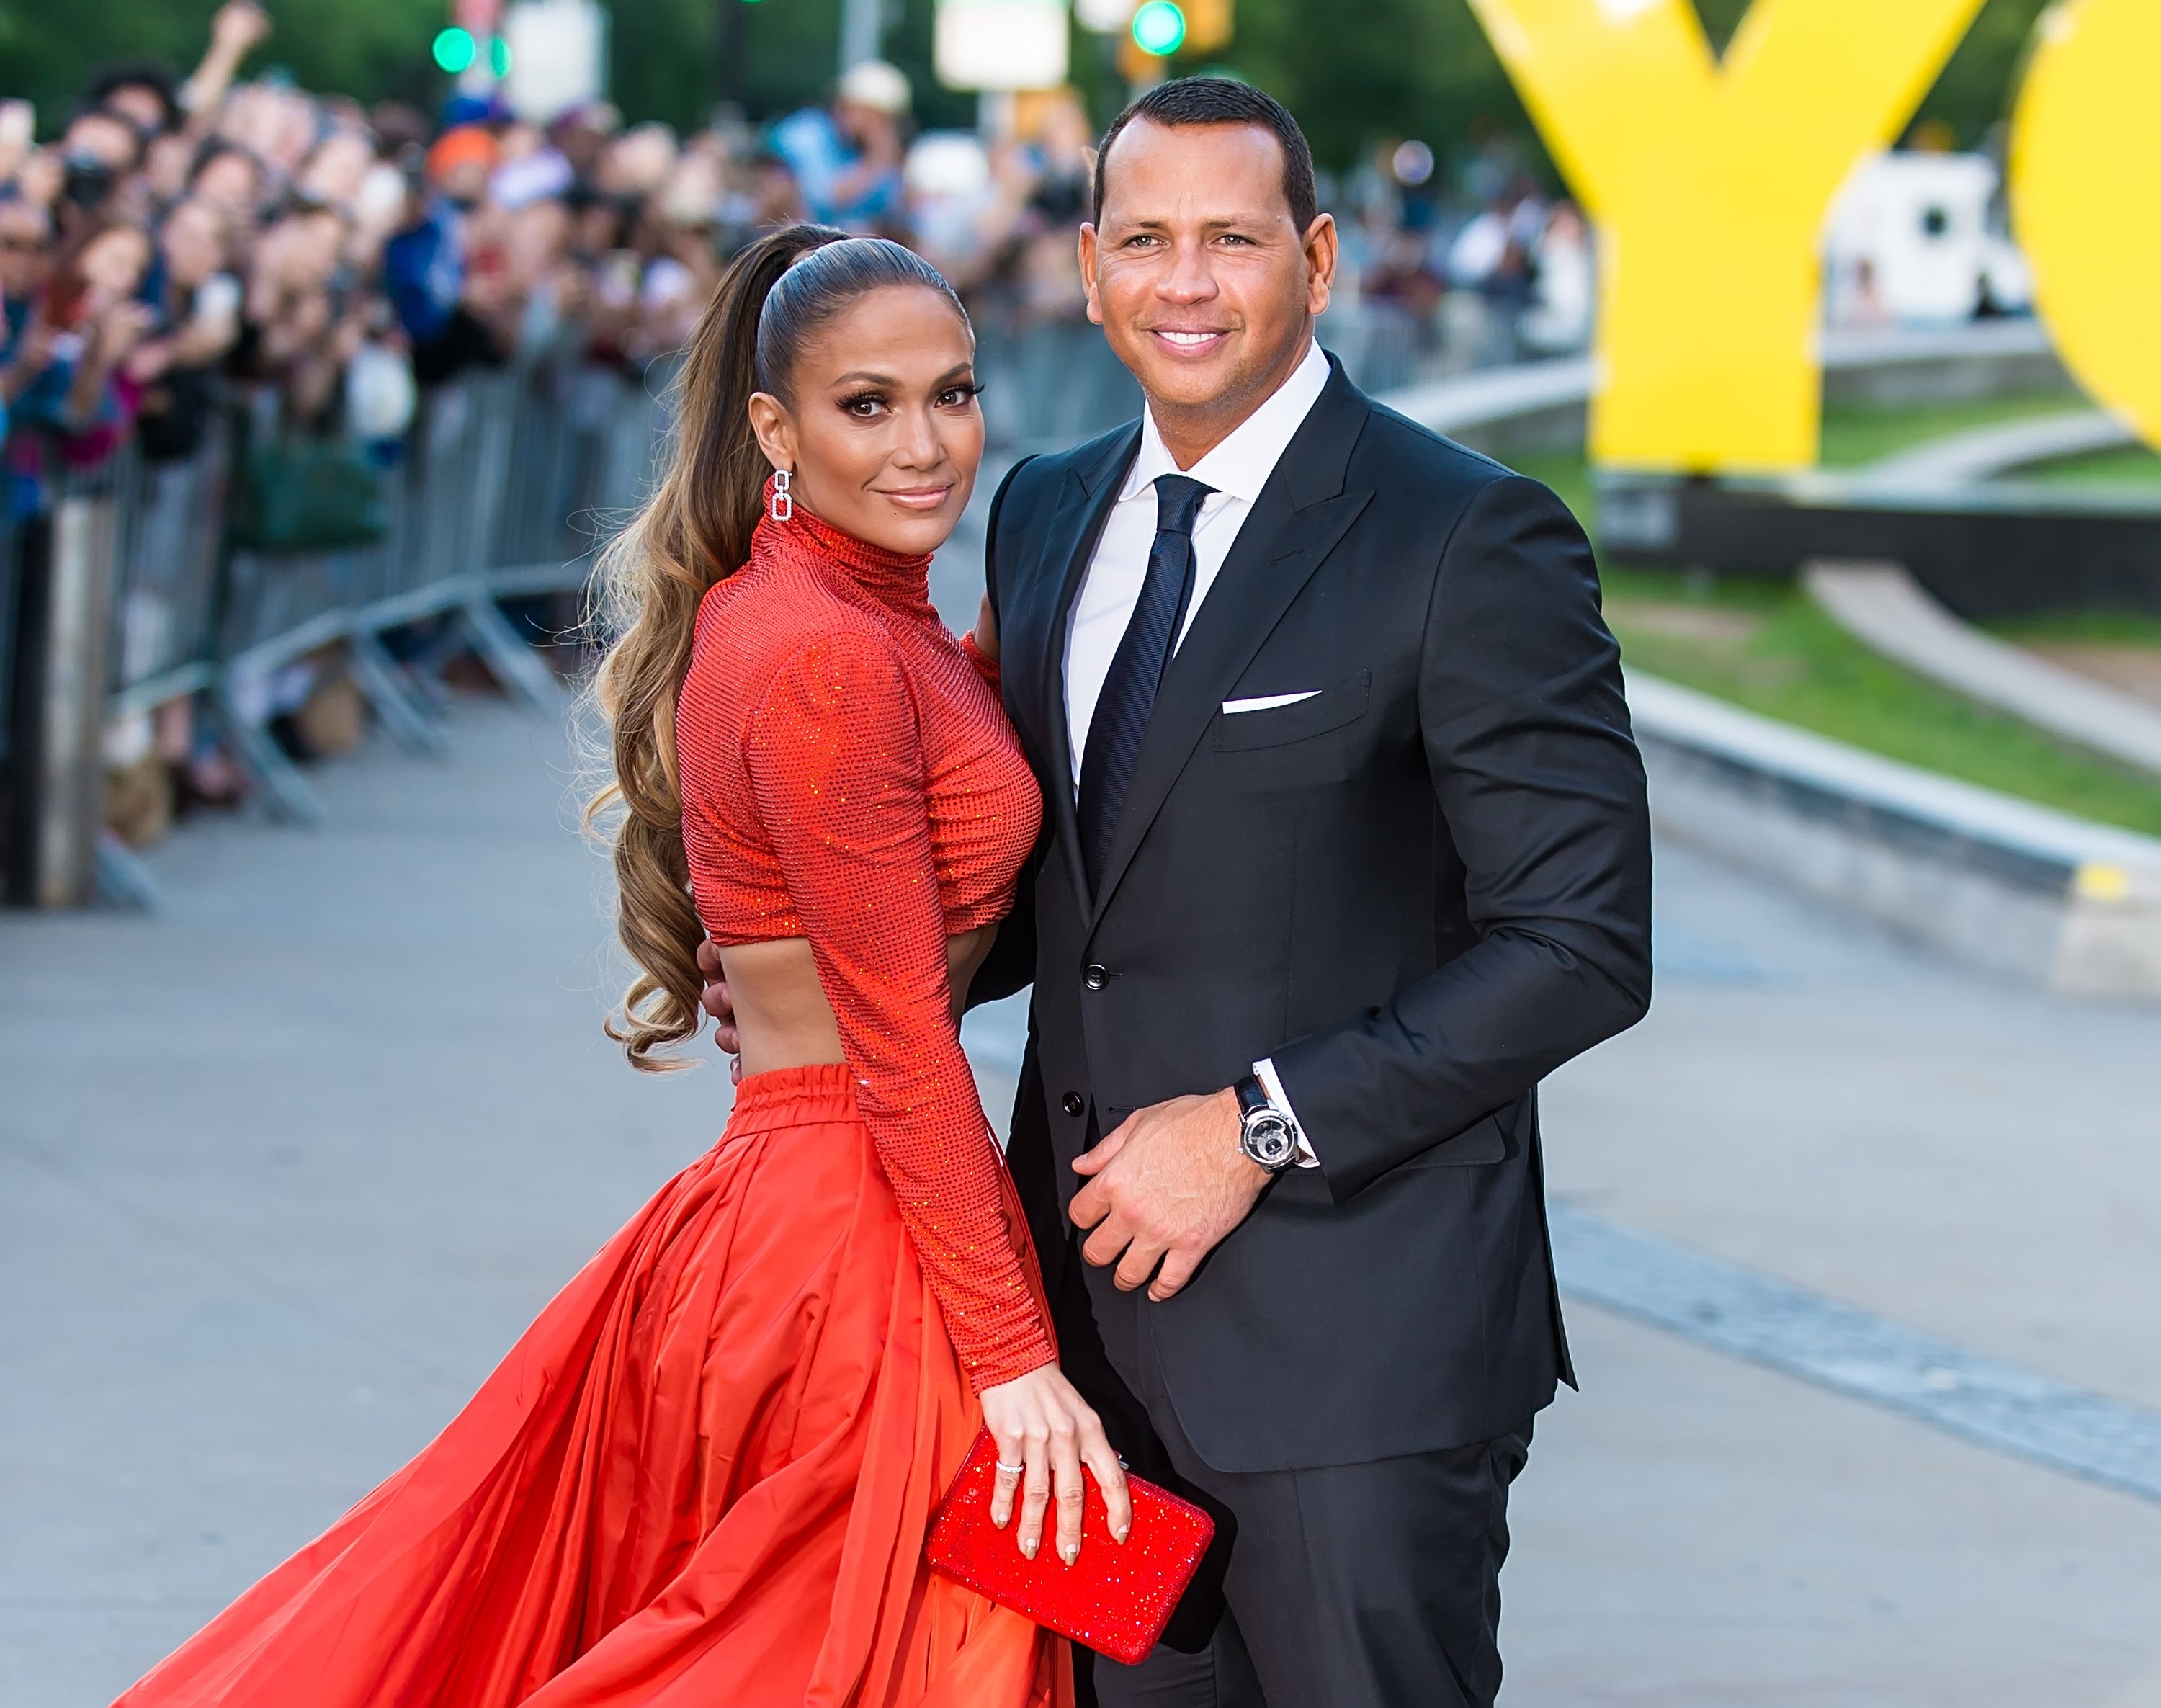 Actress Jennifer Lopez and Alex Rodriguez are seen at the 2019 CFDA Fashion Awards on June 3, 2019 | Photo: Getty Images